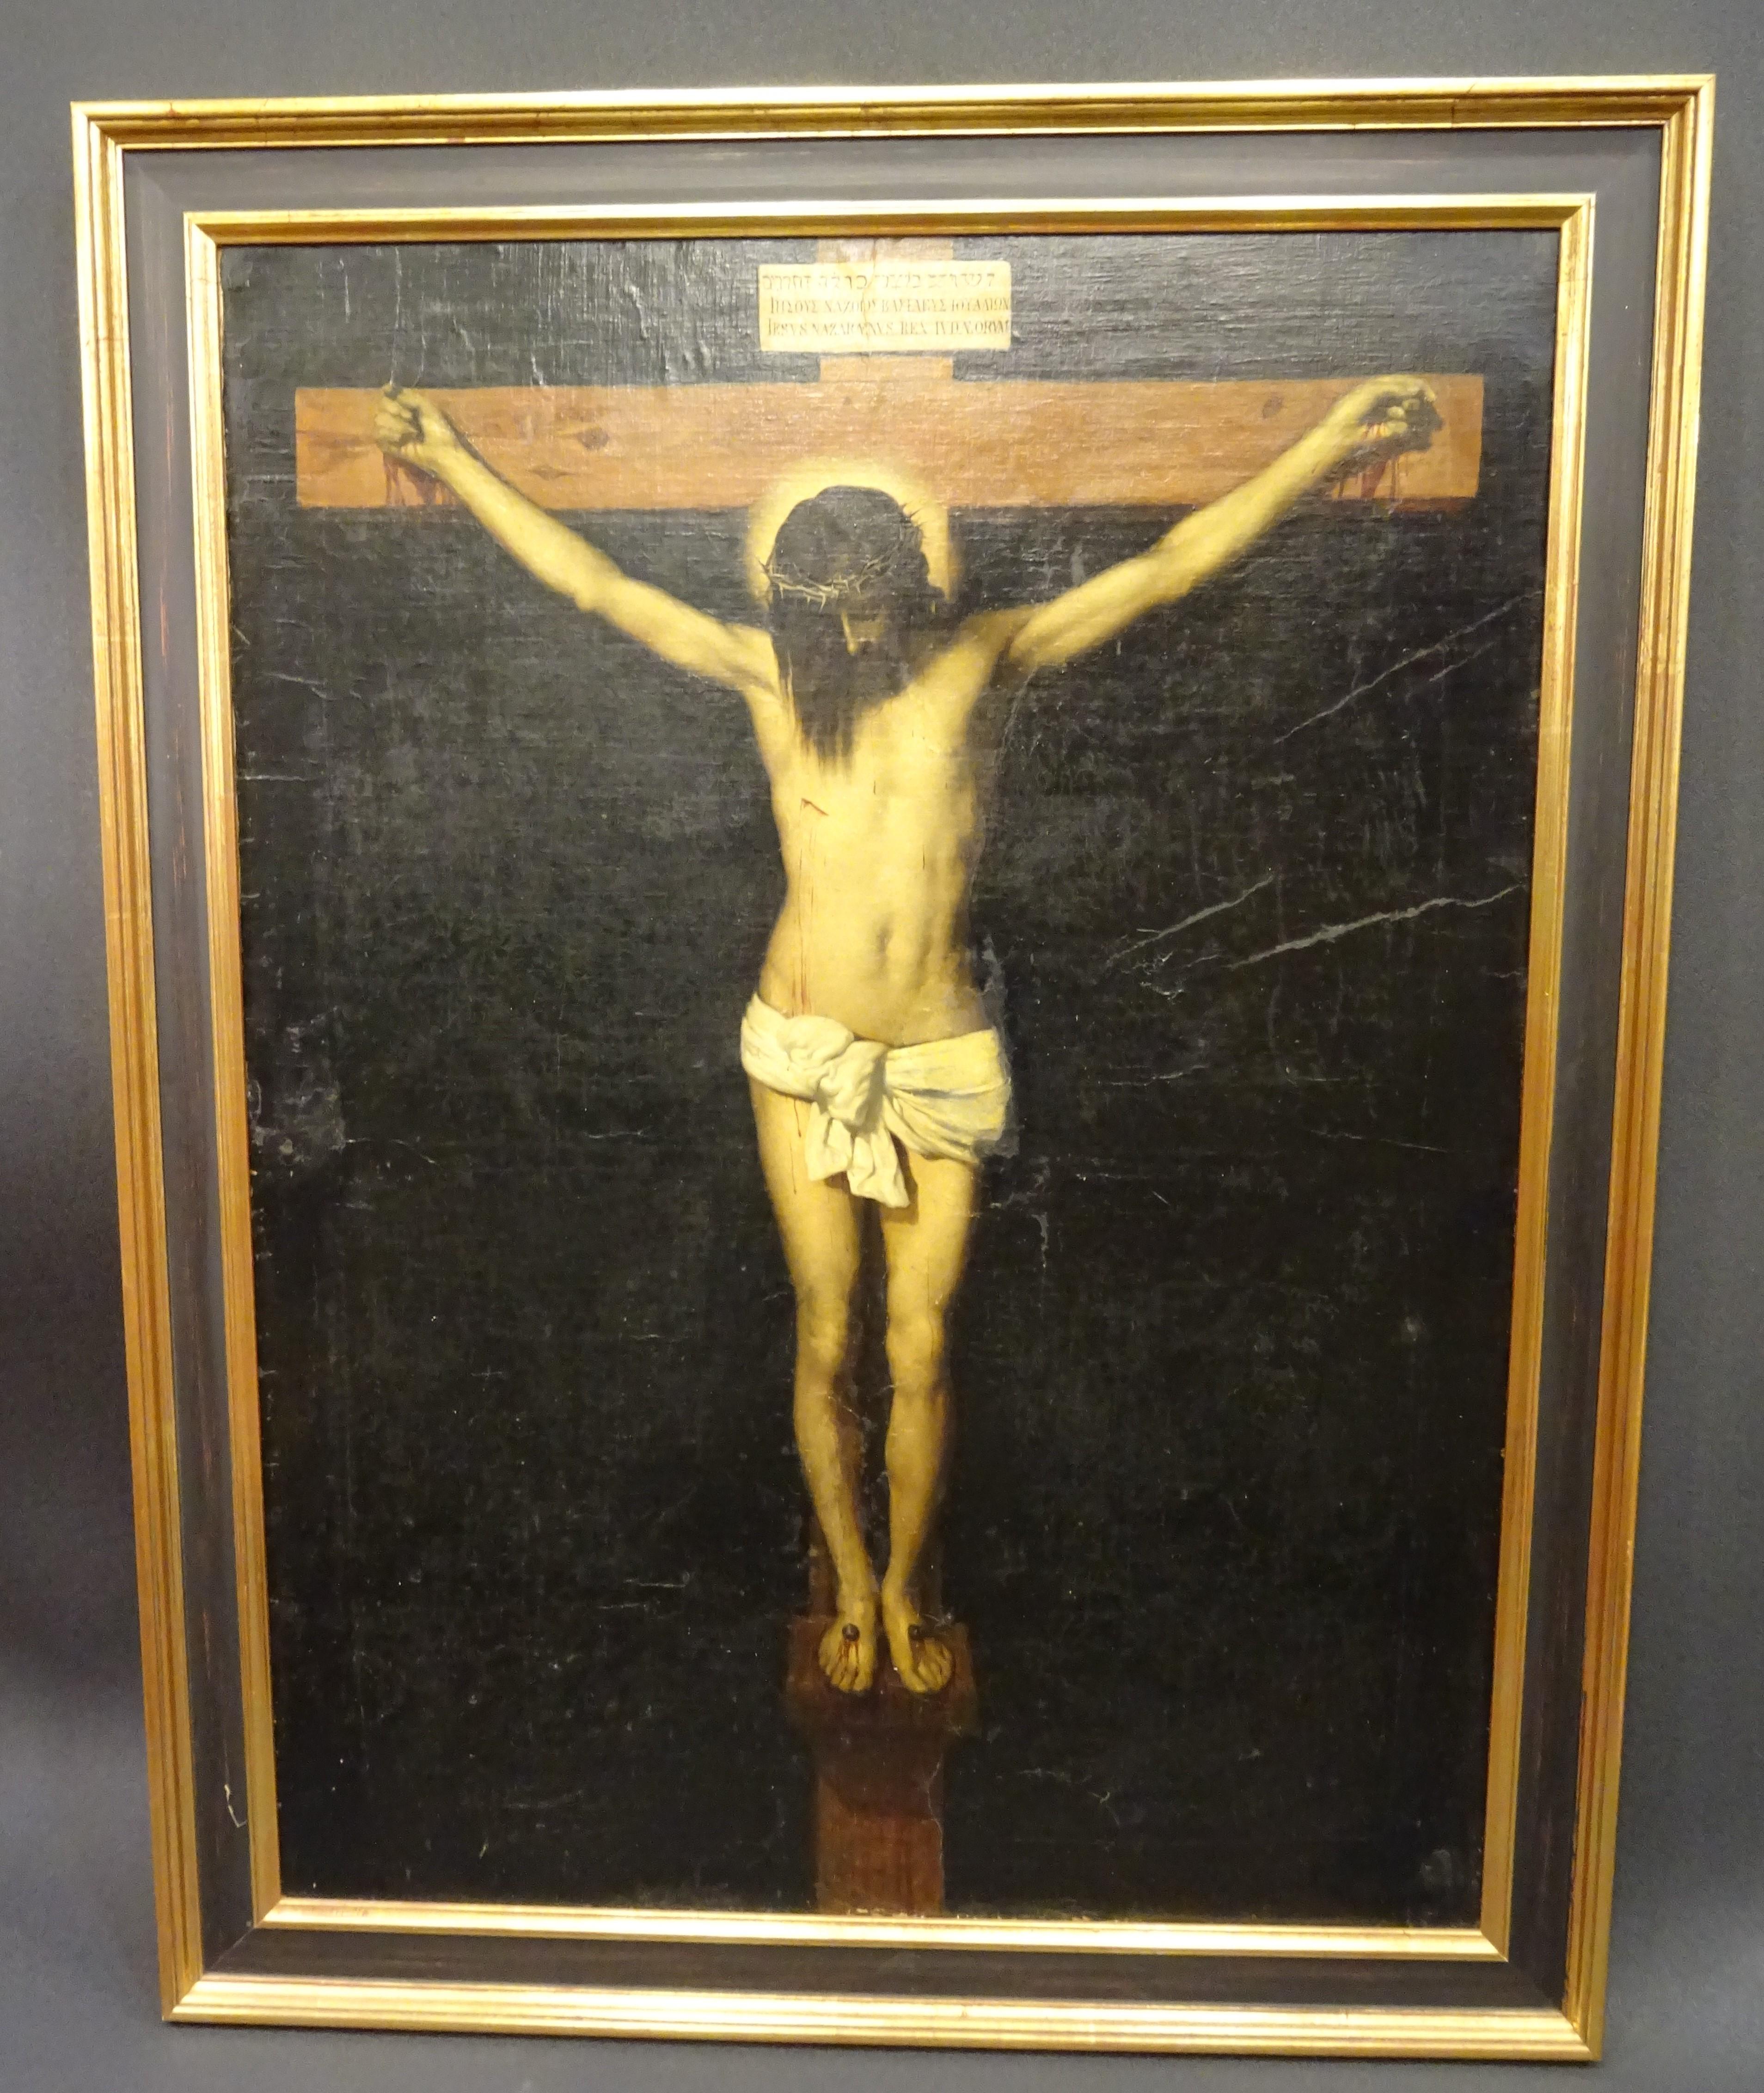 Late 19th Century 19th Century after Spanish Painter Velazquez Christ Oil on Canvas and Wood Frame